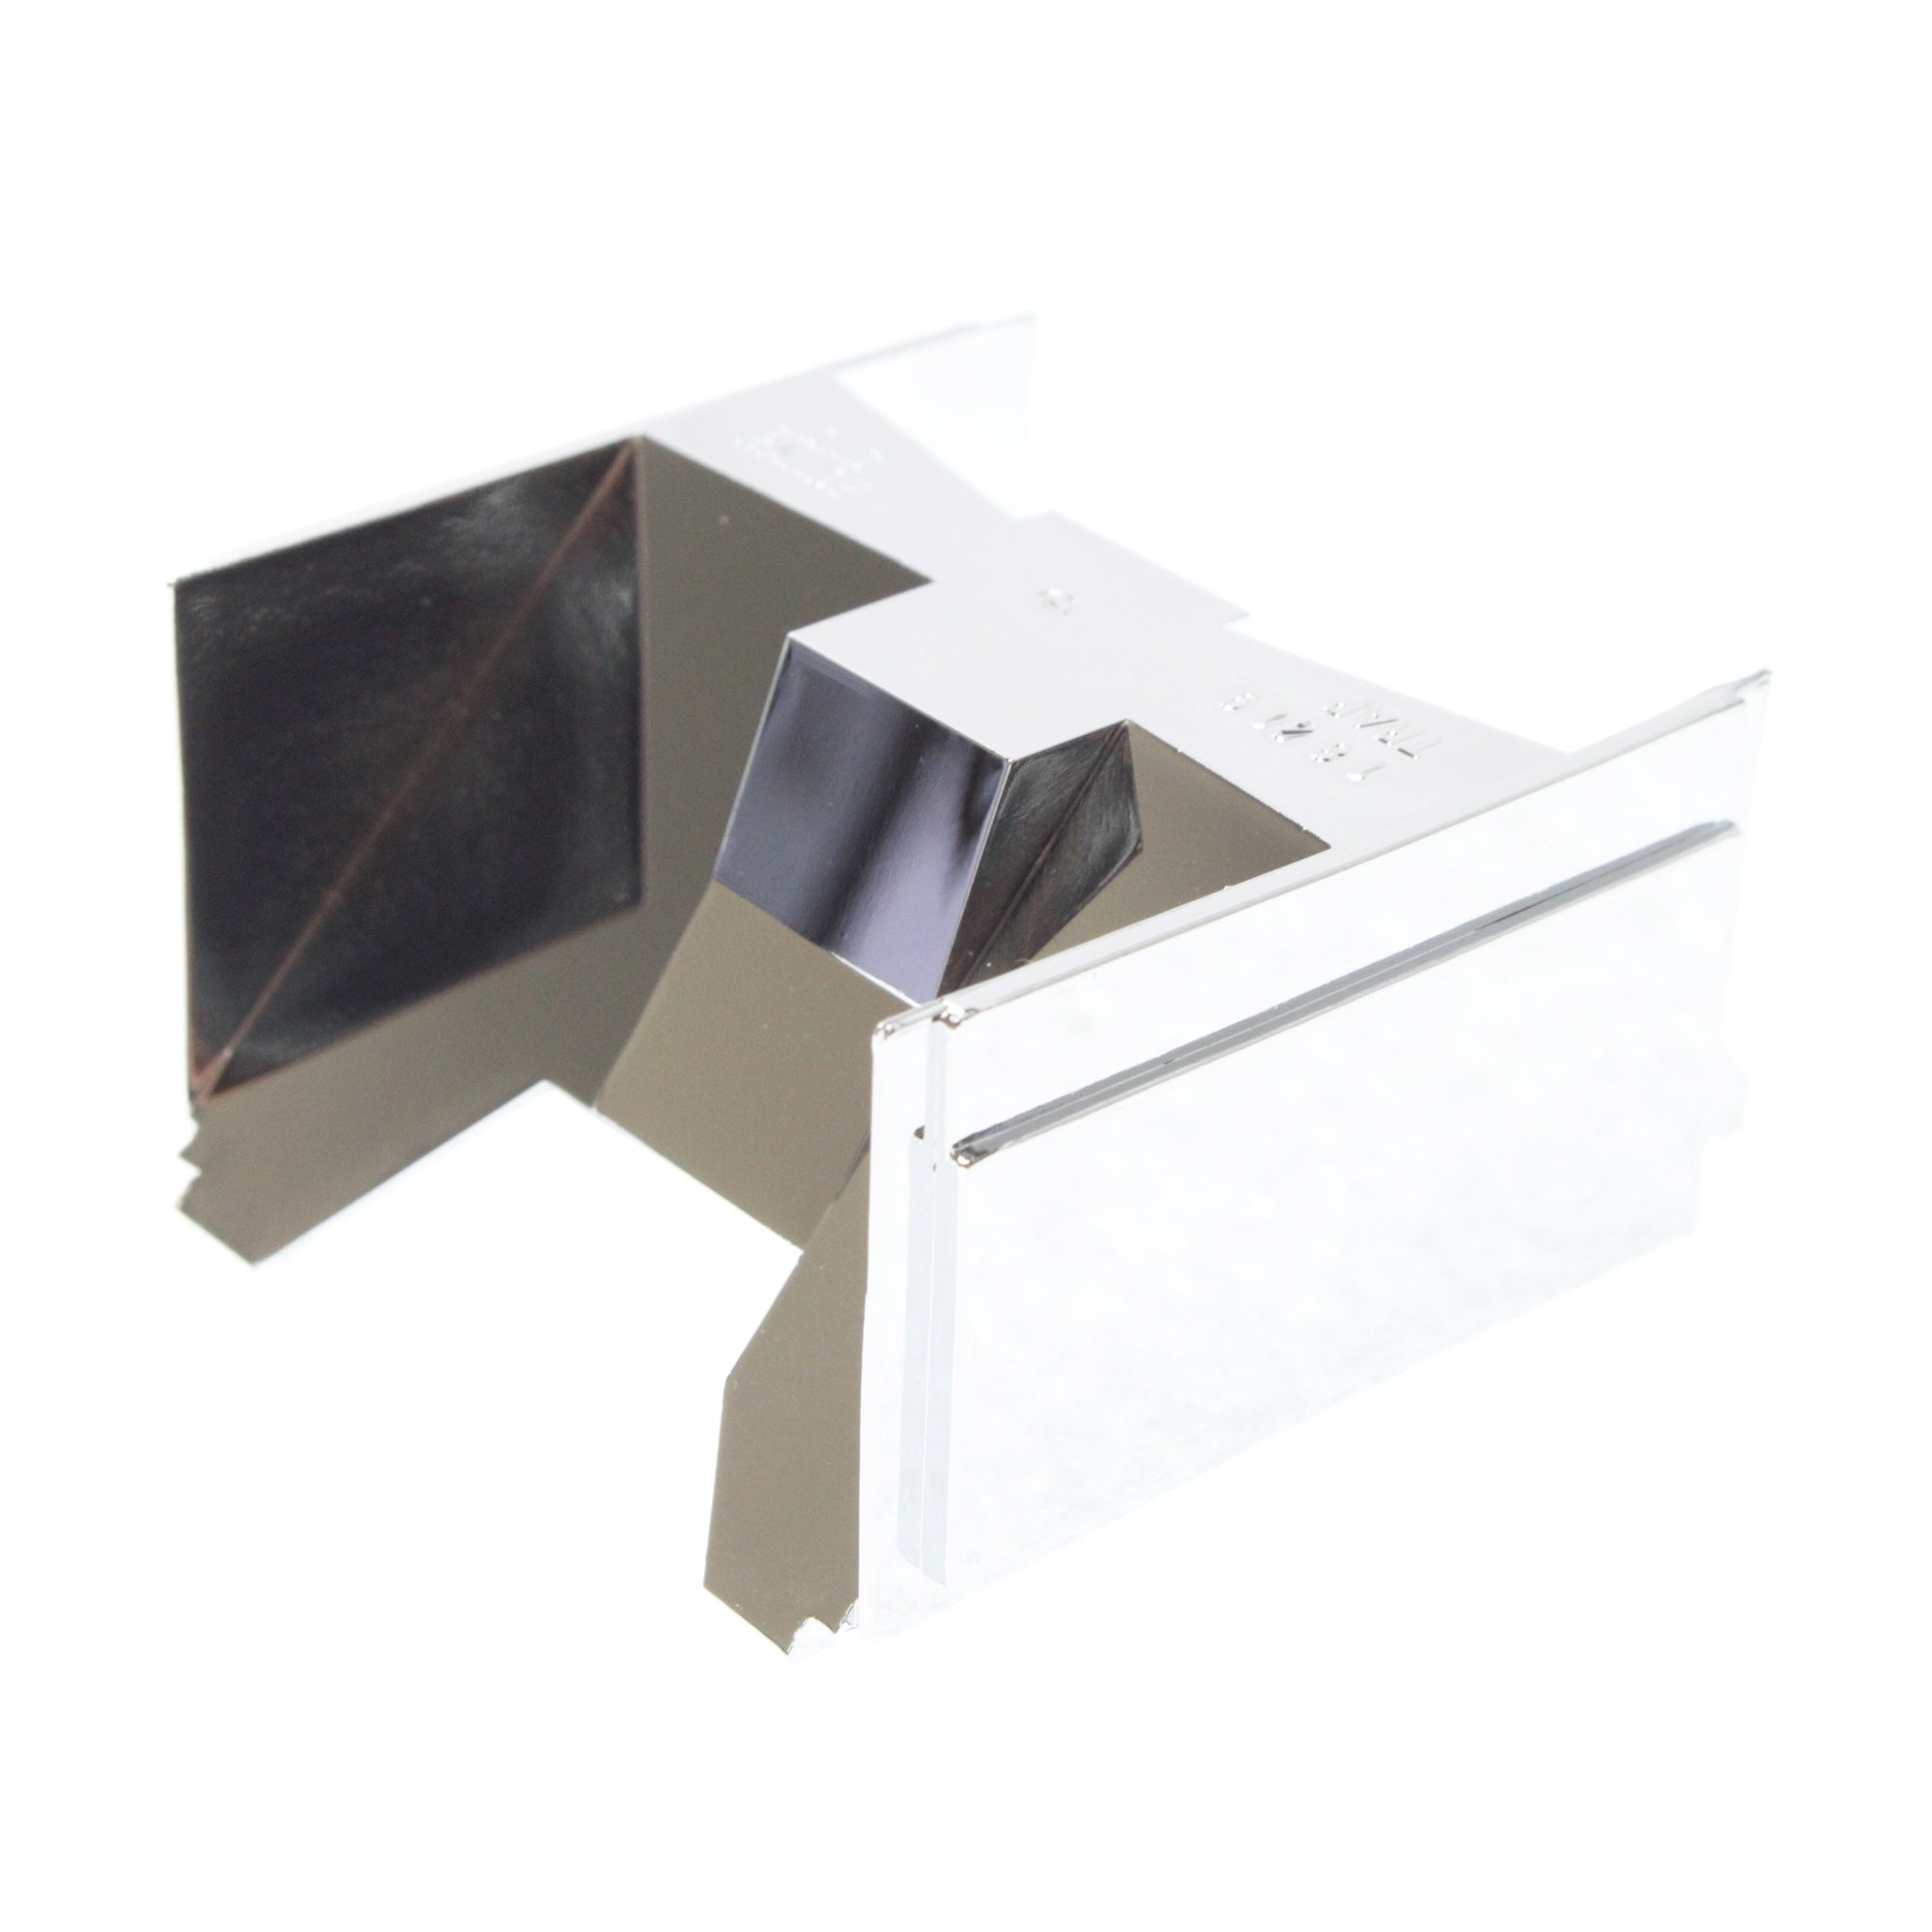 Detection Systems, DETECTION SYSTEMS OMLR/T-3 LONG RANGE TRAP MIRROR - PROVIDES 25'X16' PATTERN